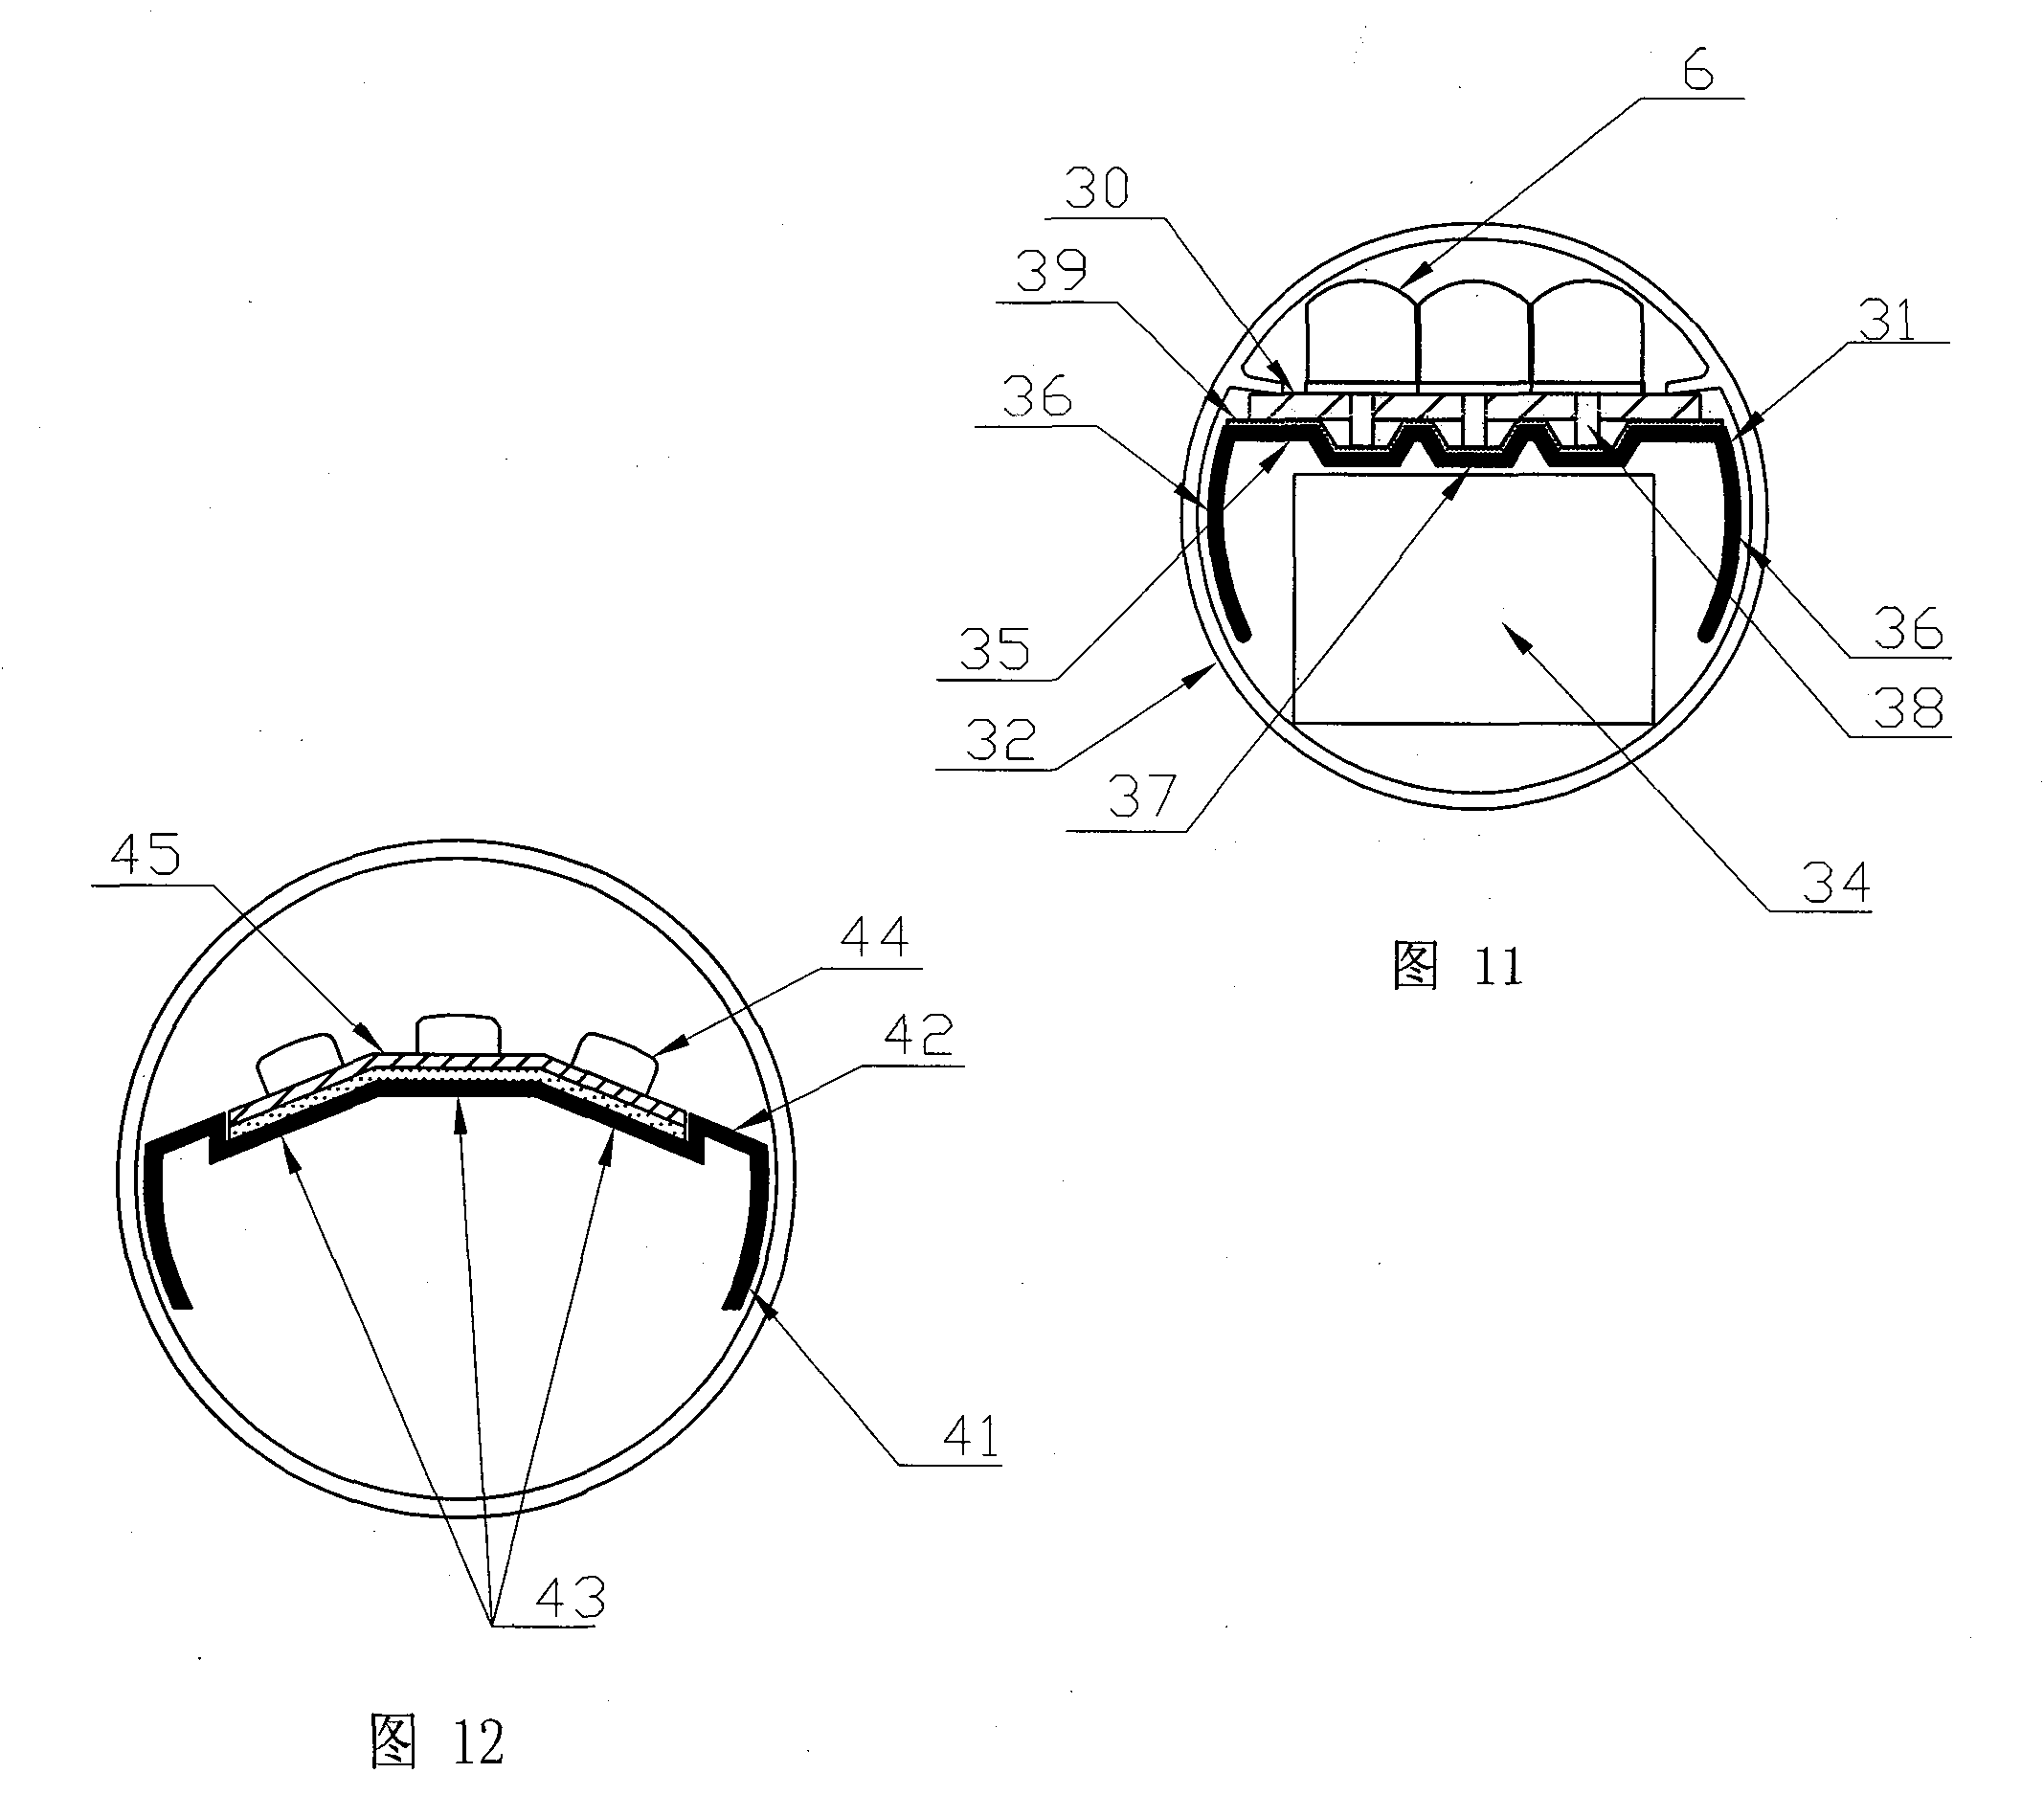 Heat-dissipation structure of light-emitting diode (LED) daylight lamp